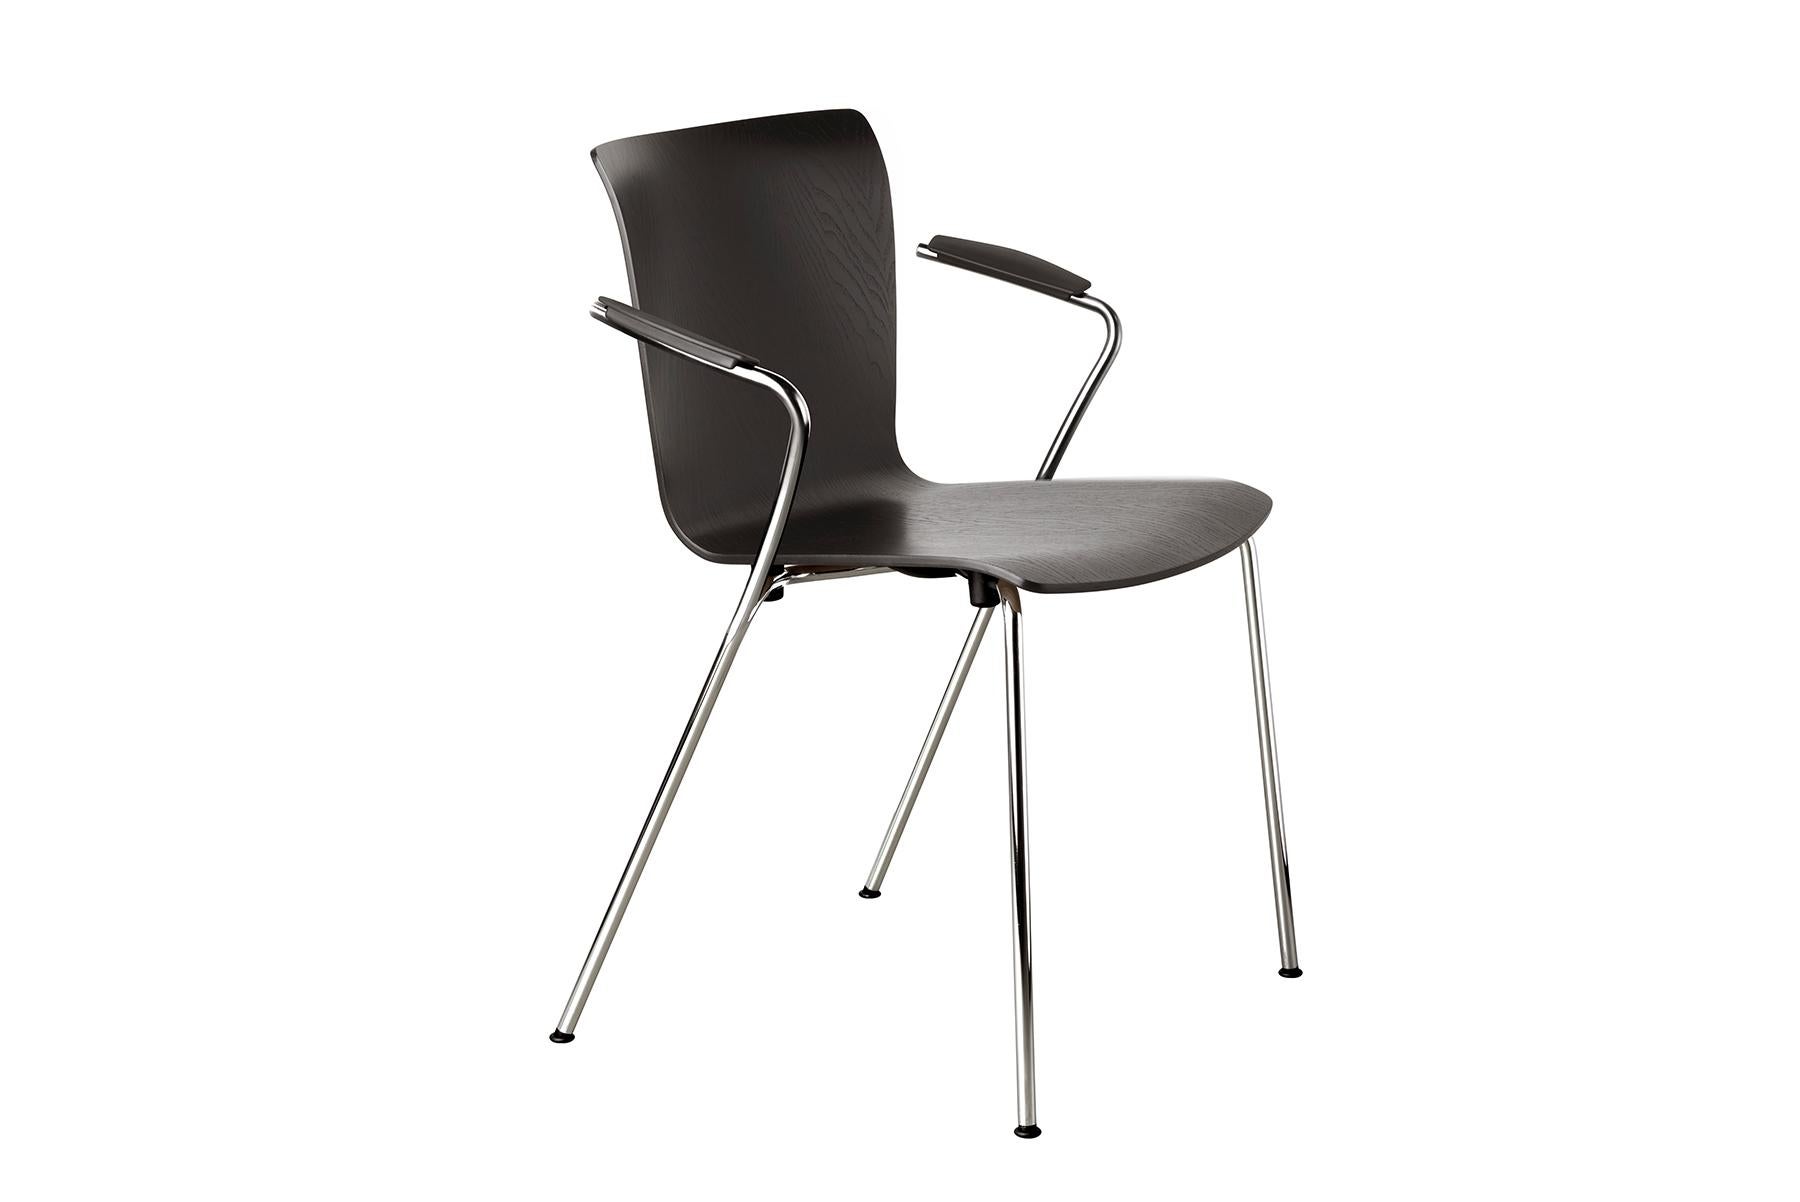 The Vico Duo is a stylish veneer stacking chair by Vico Magistretti that is versatile and perfectly suited for agile workspace and hospitality design.

The chair is simple with tight lines. A loose ‘z’ line drawn across paper inspired the chair’s